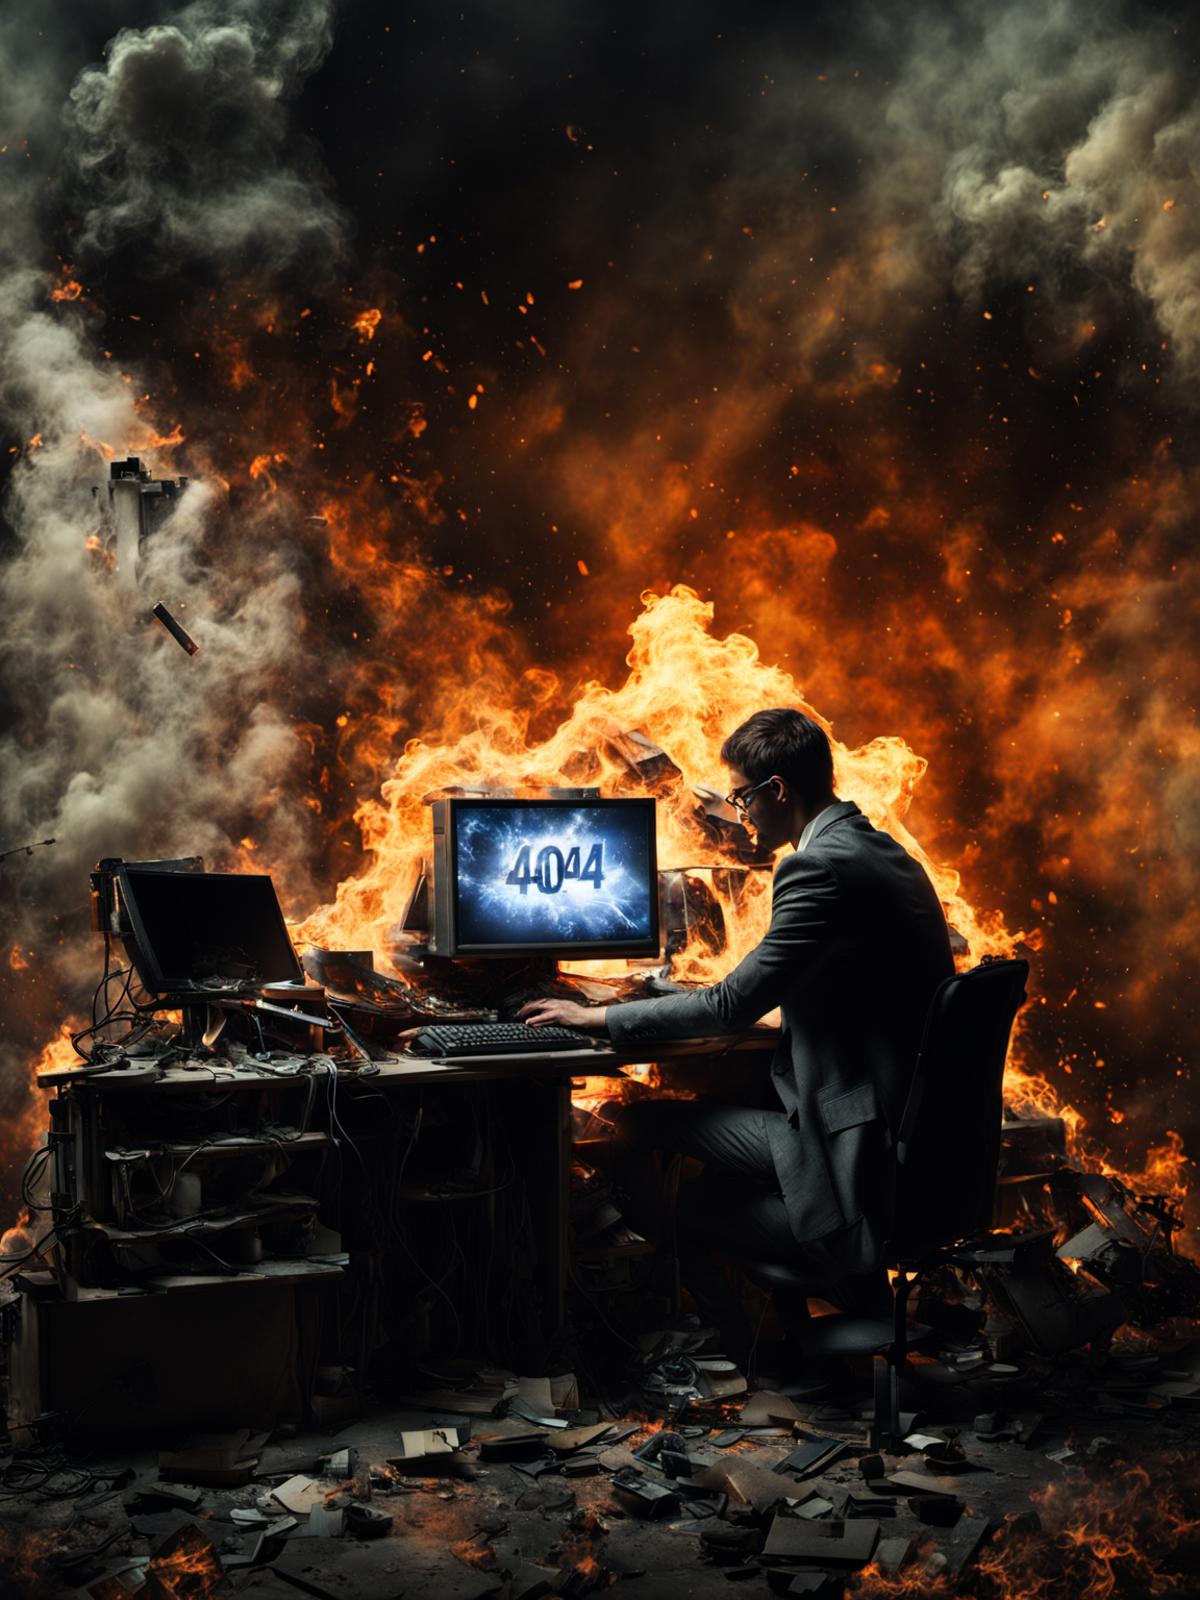 A man sitting at a computer desk with a monitor displaying the number 404 in front of a raging inferno.